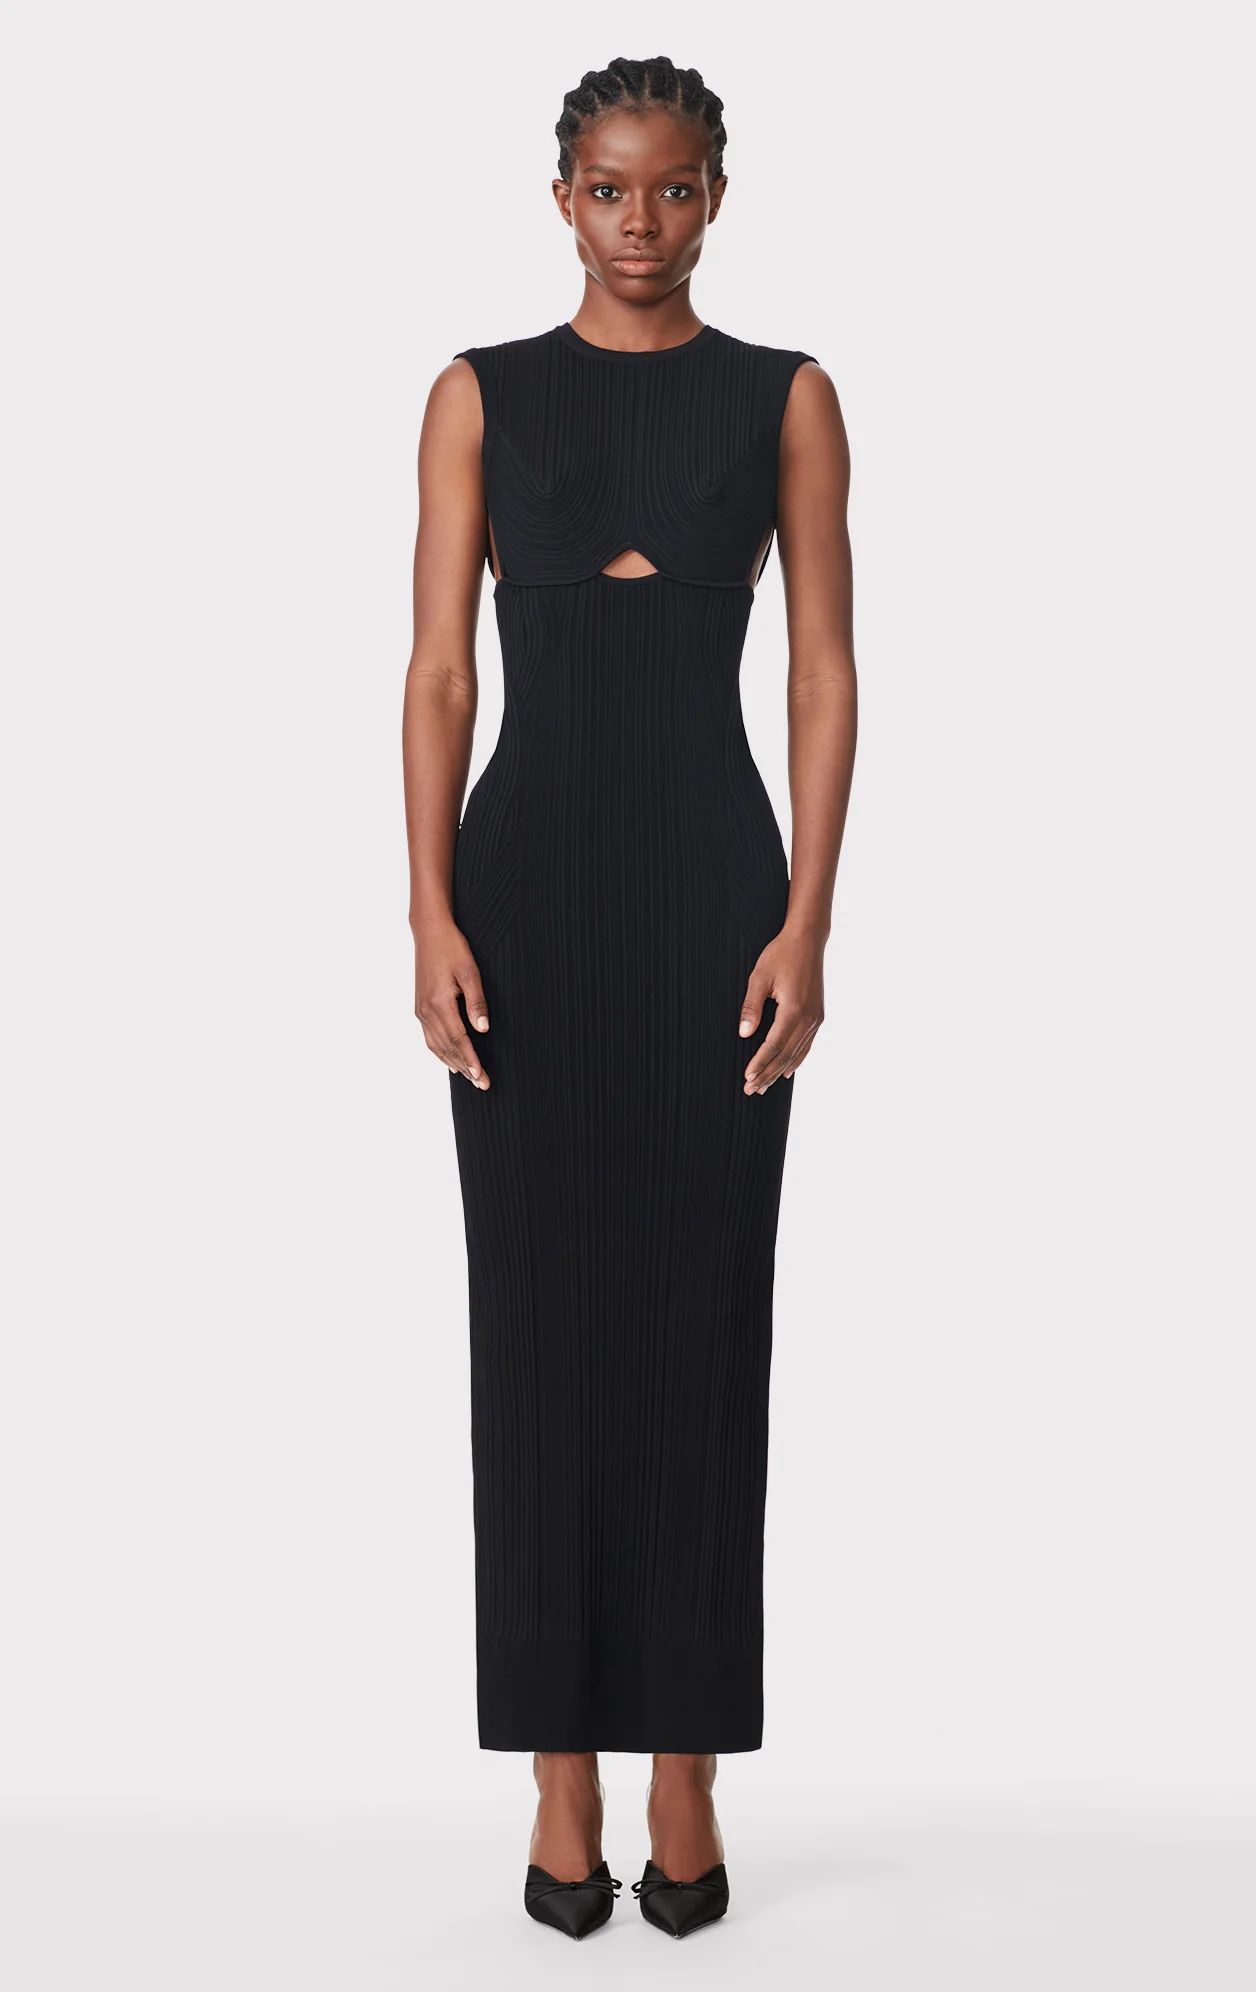 VARIEGATED RIB CAP GOWN | Herve Leger